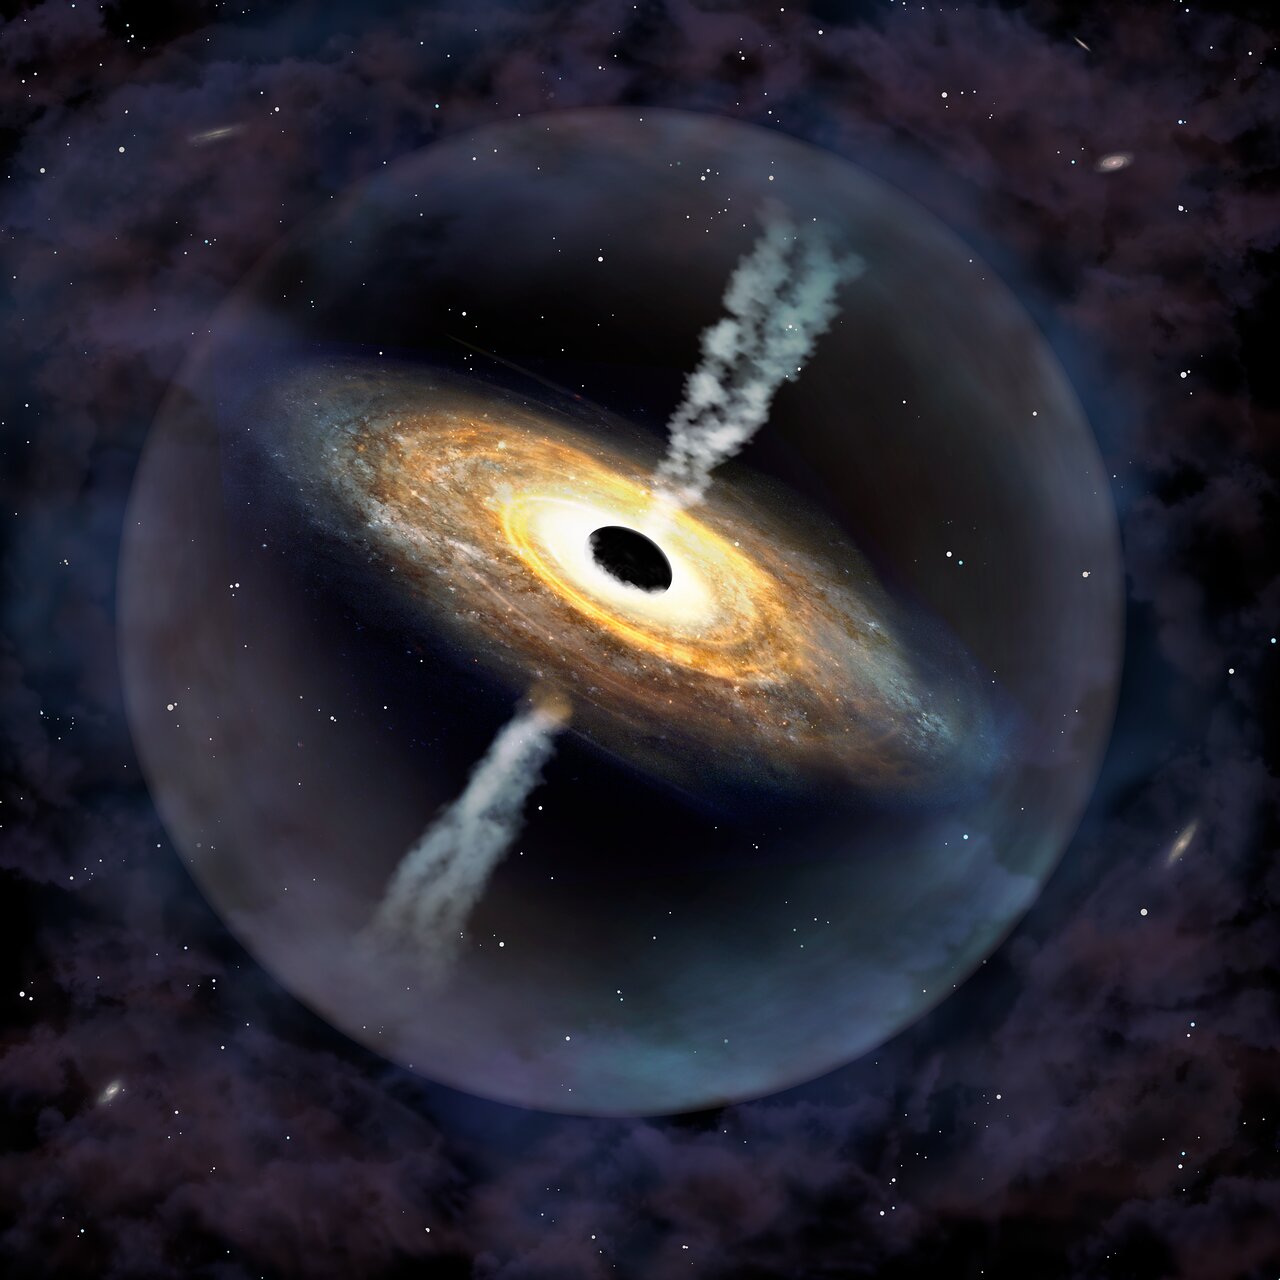 Monster Black Hole Found in the Early Universe | NOIRLab